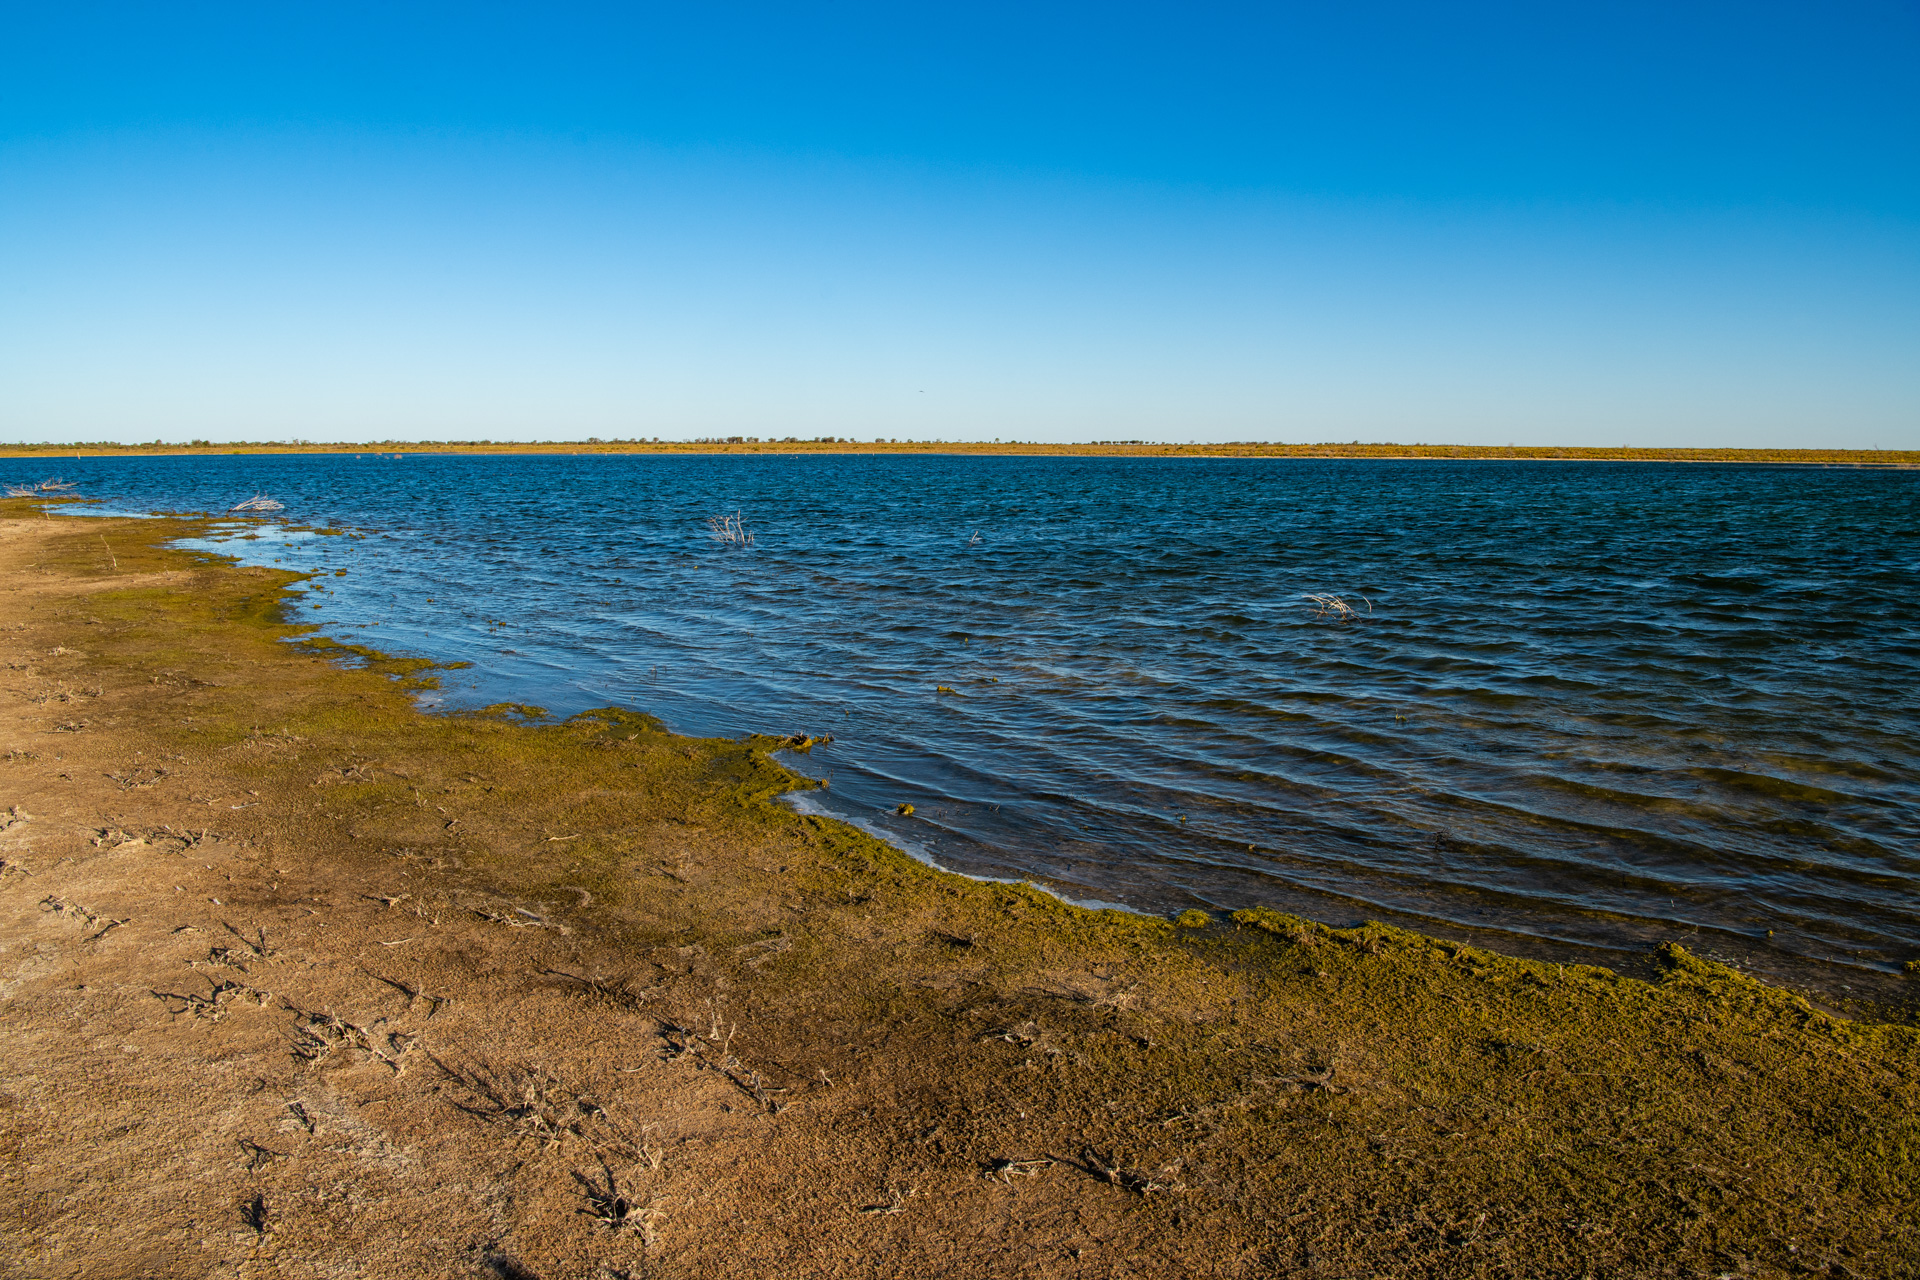 Lake Wyara, an intermittent saline lake in the Paroo Catchment. Photo by Gary Cranitch © Queensland Museum